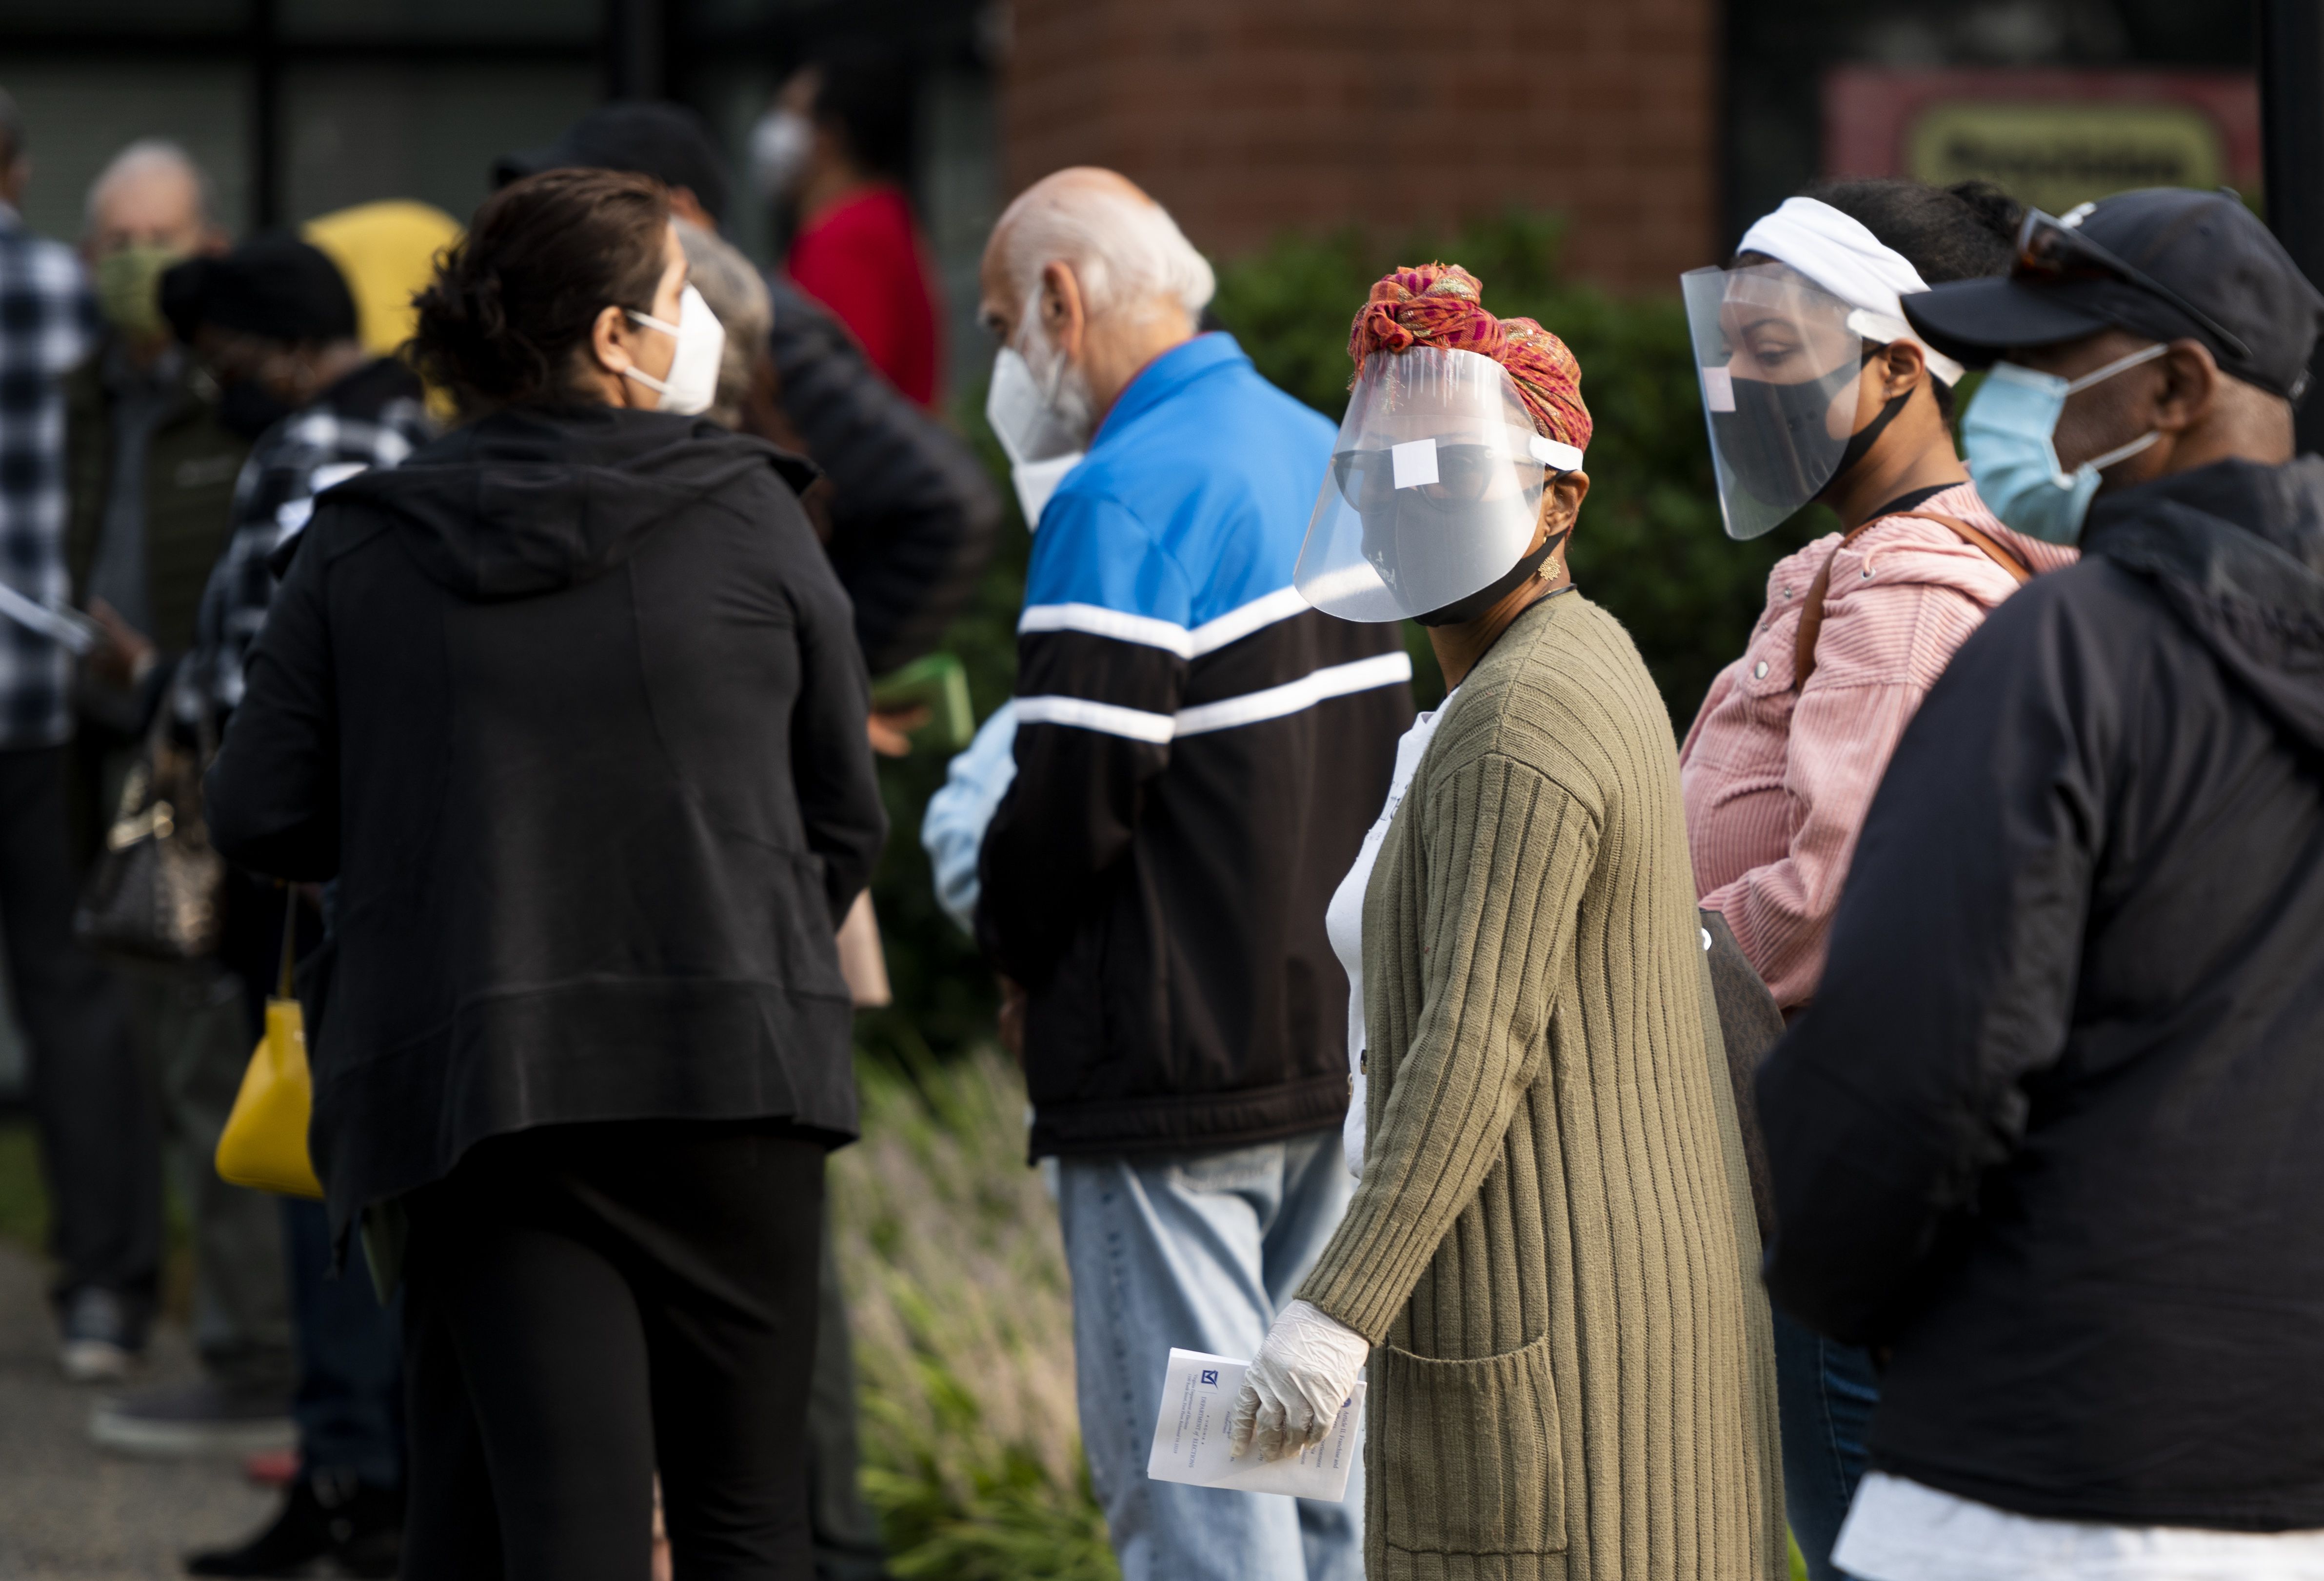 Voters wearing face masks wait in line for the Loudoun County 